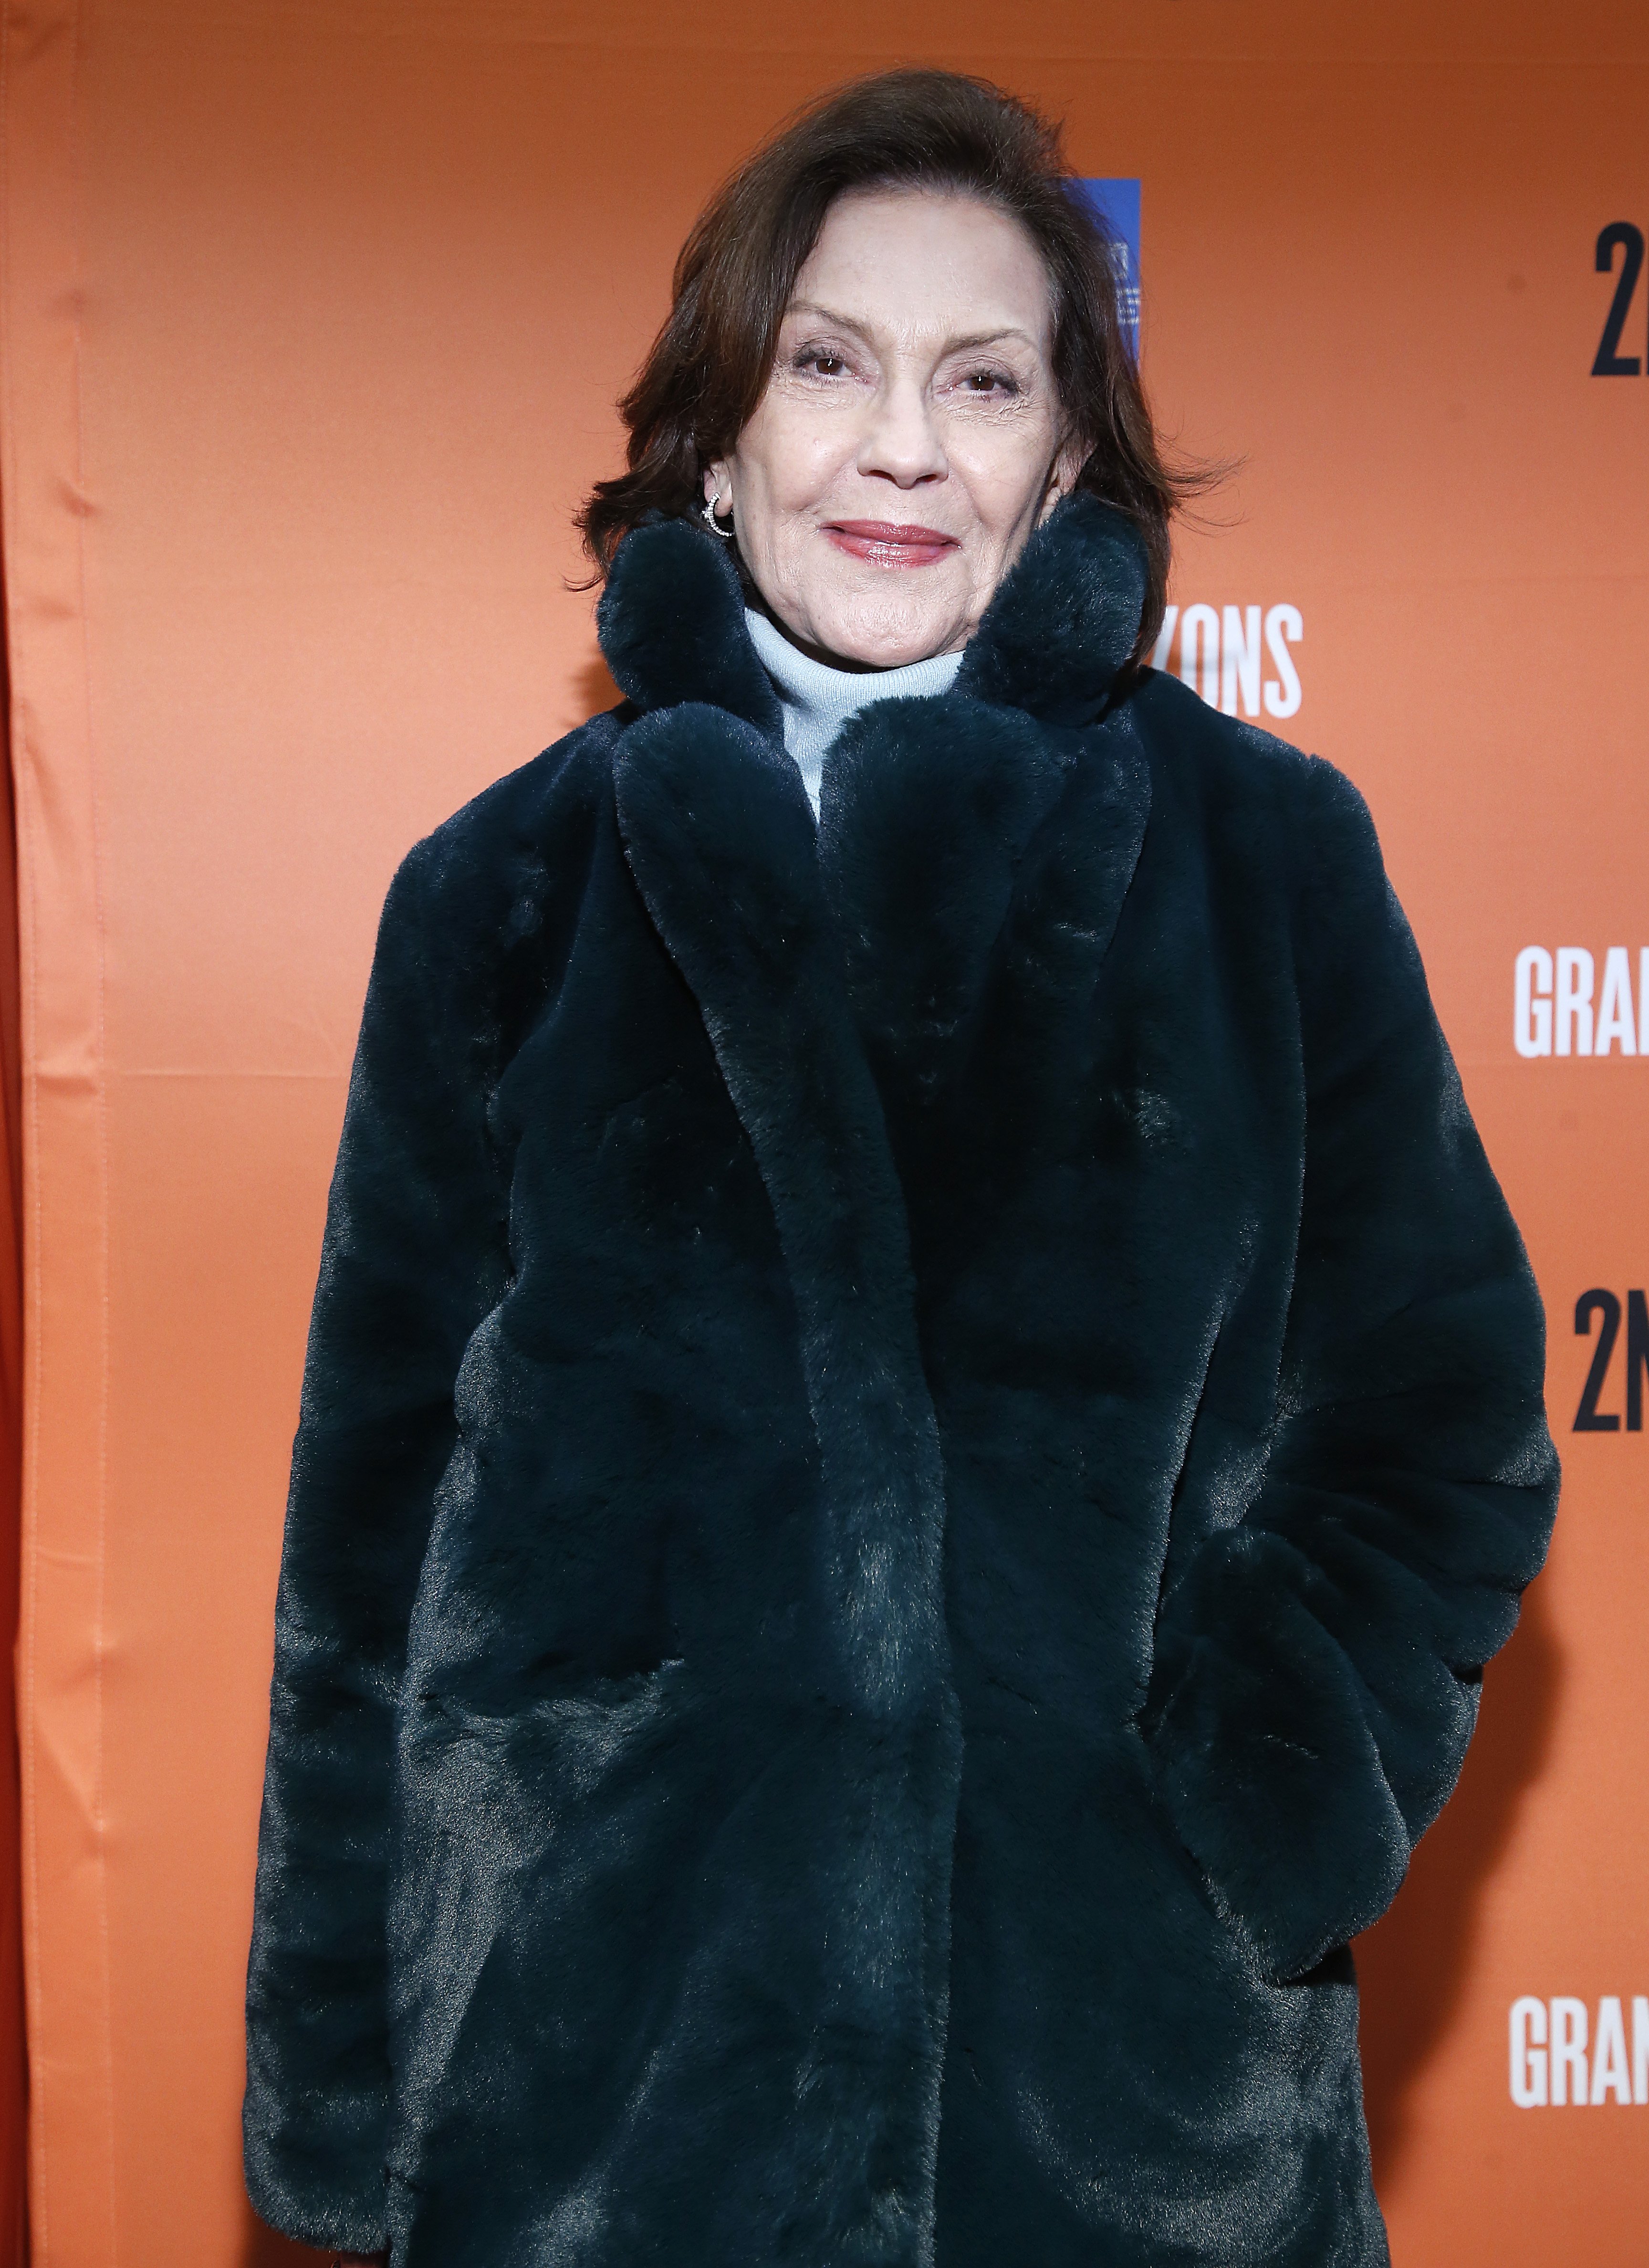 Kelly Bishop im Hayes Theatre am 23. Januar 2020 in New York City. | Quelle: Getty Images